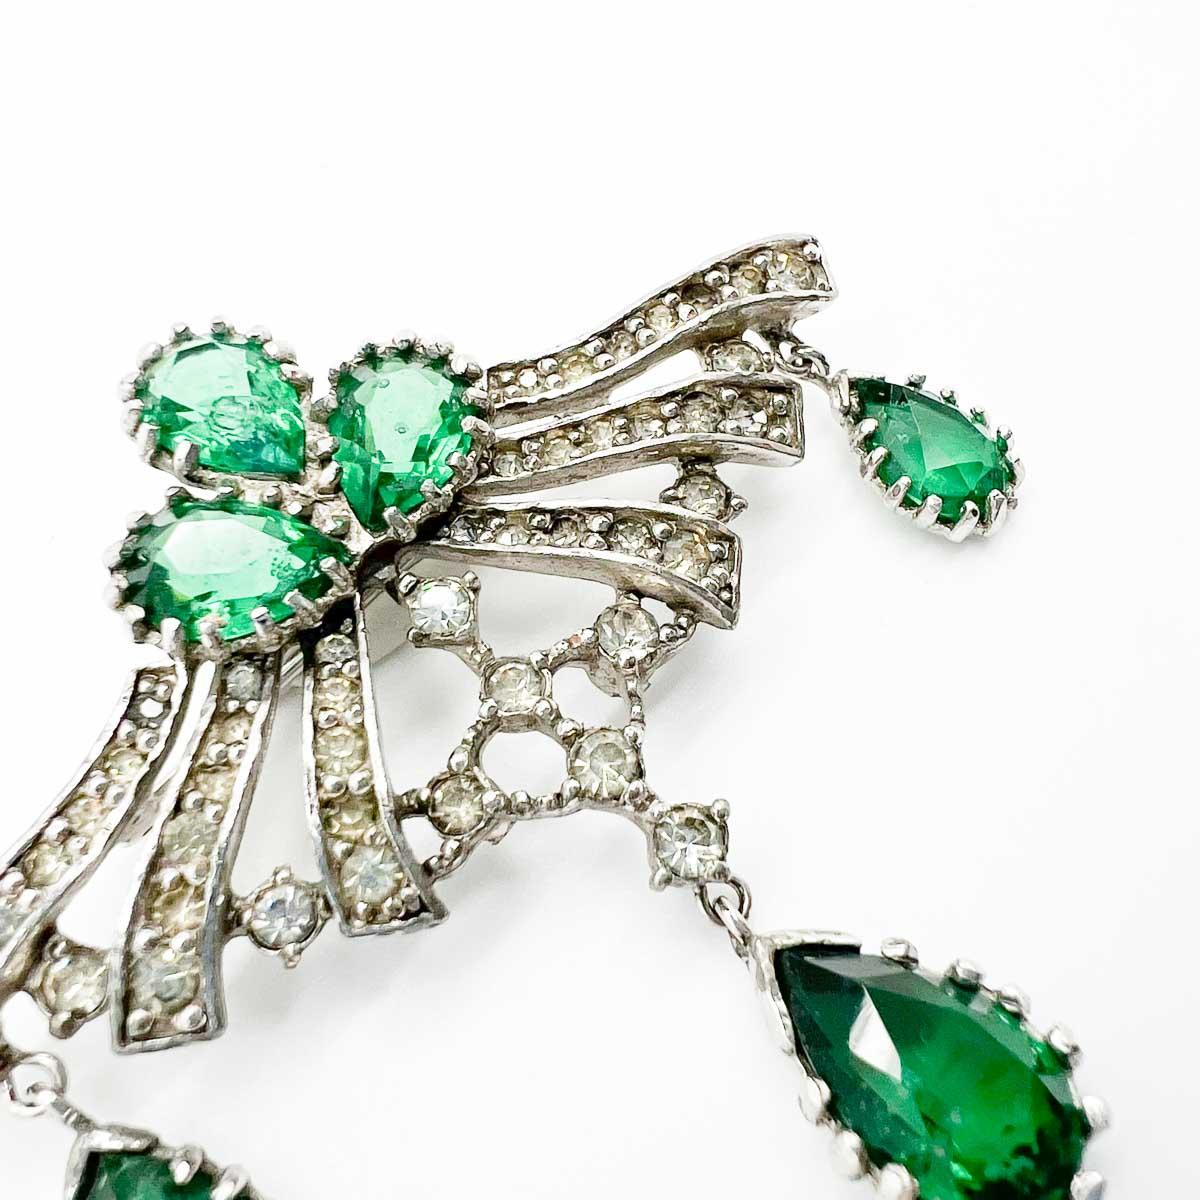 A delightful Vintage French Emerald Paste Brooch. Whilst unsigned nor attributed this piece carries elements of couture pieces. Not least the exquisite attention to detail in the setting including individually and finely claw set stones, the flawed